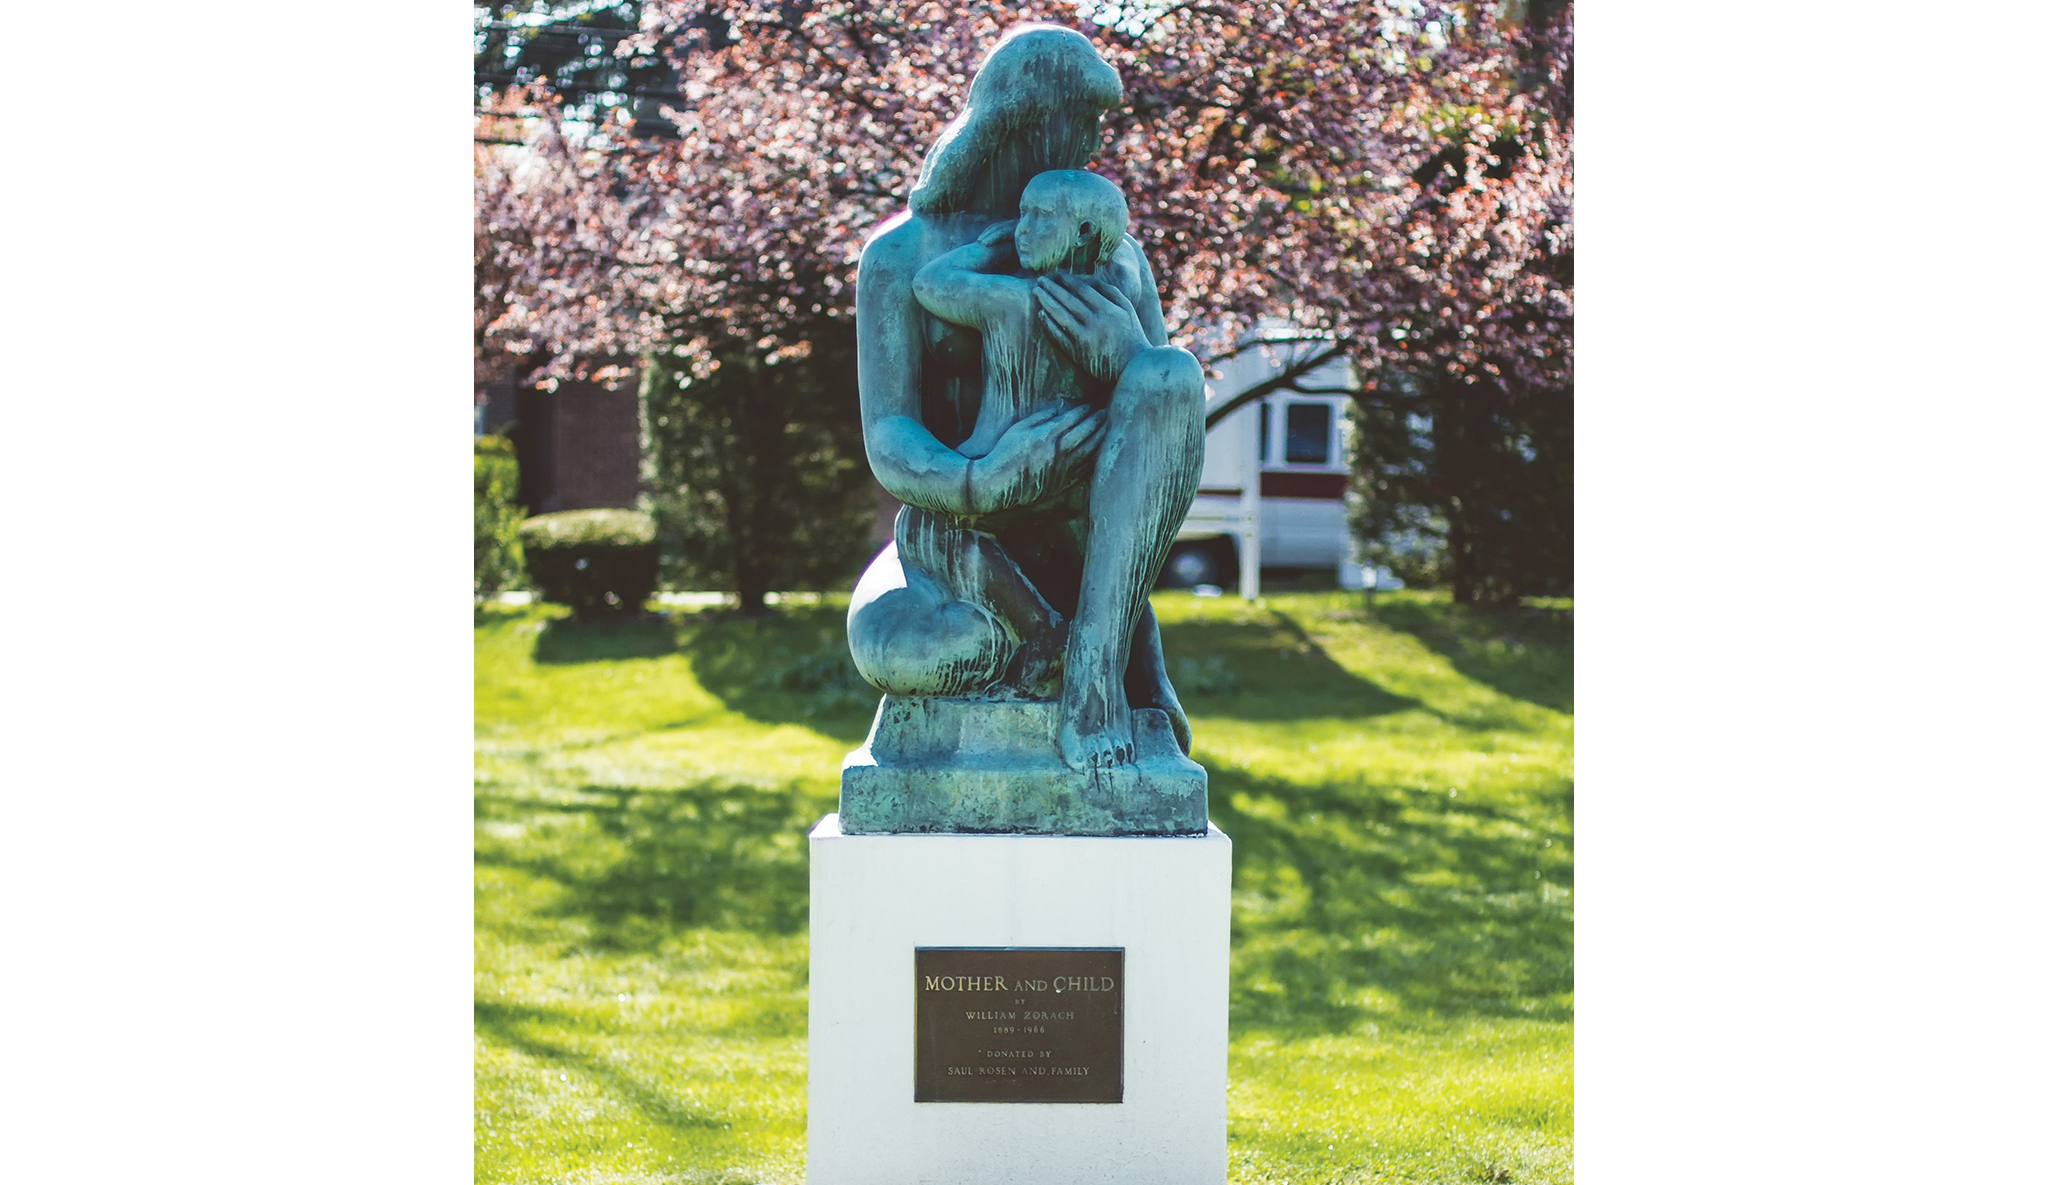 Mother and Child sculpture in spring, with trees blooming behind the statue.